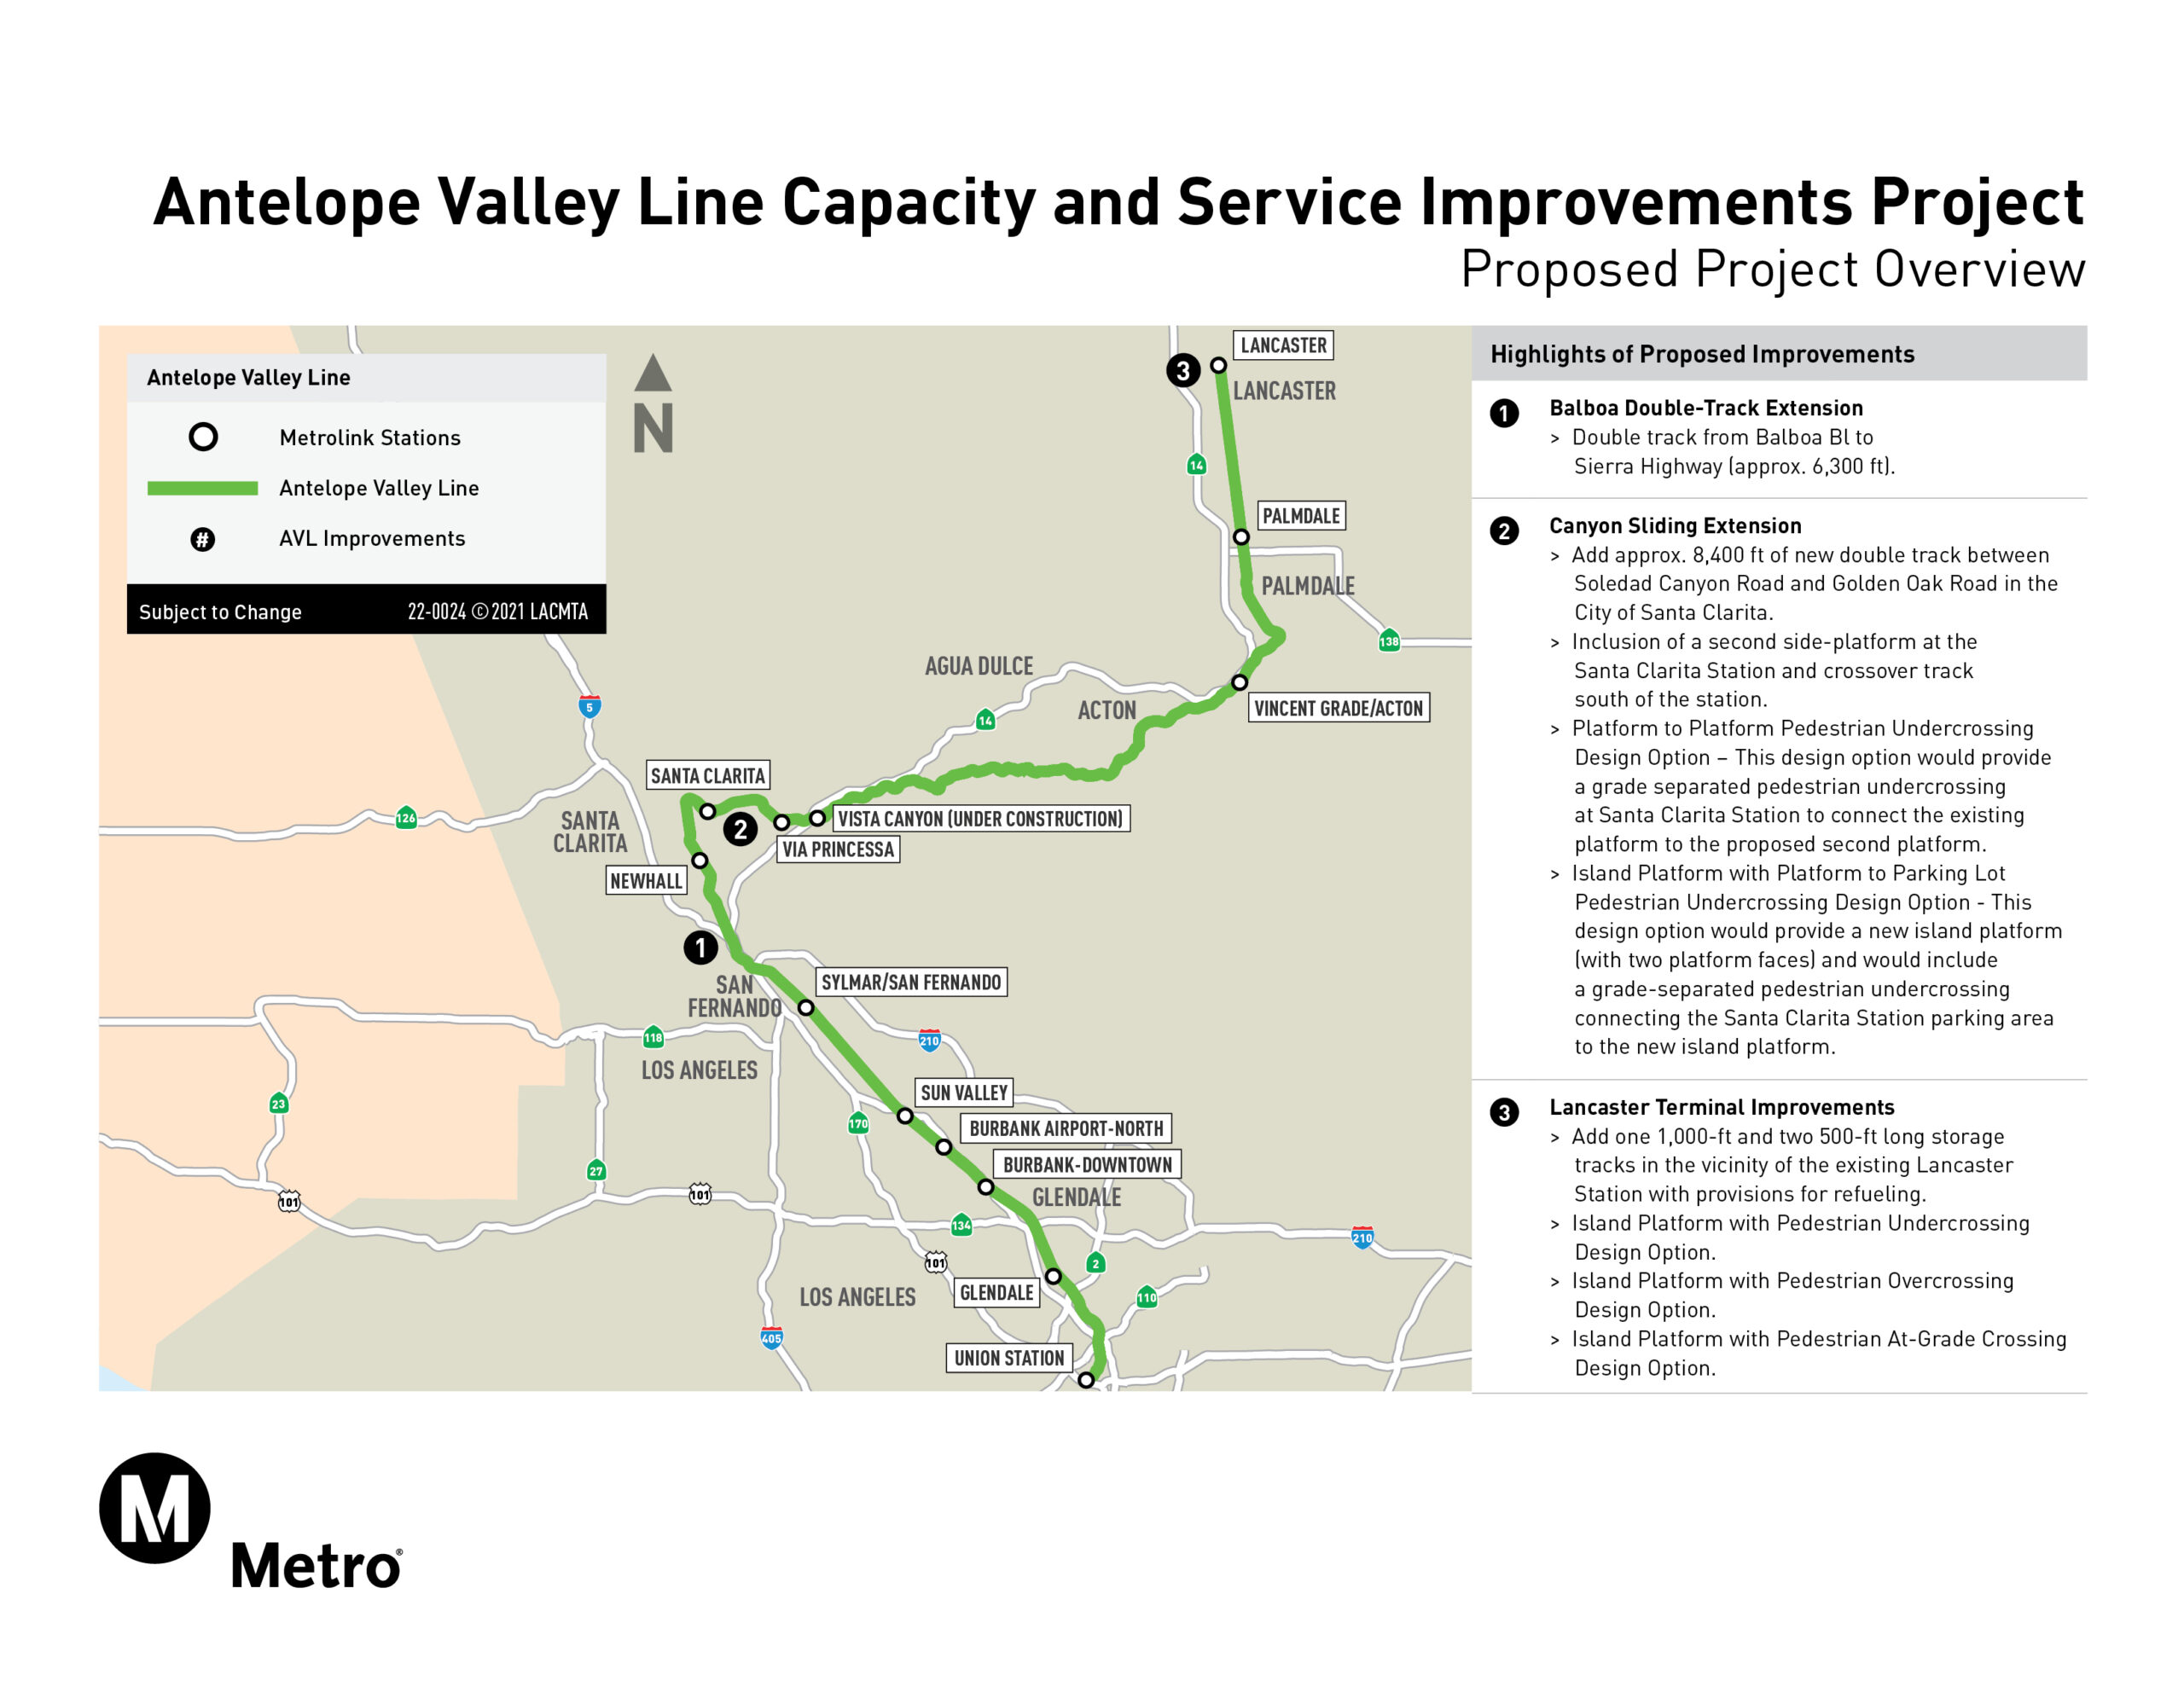 Antelope Valley Line Capacity and Service Improvements Program Project Map